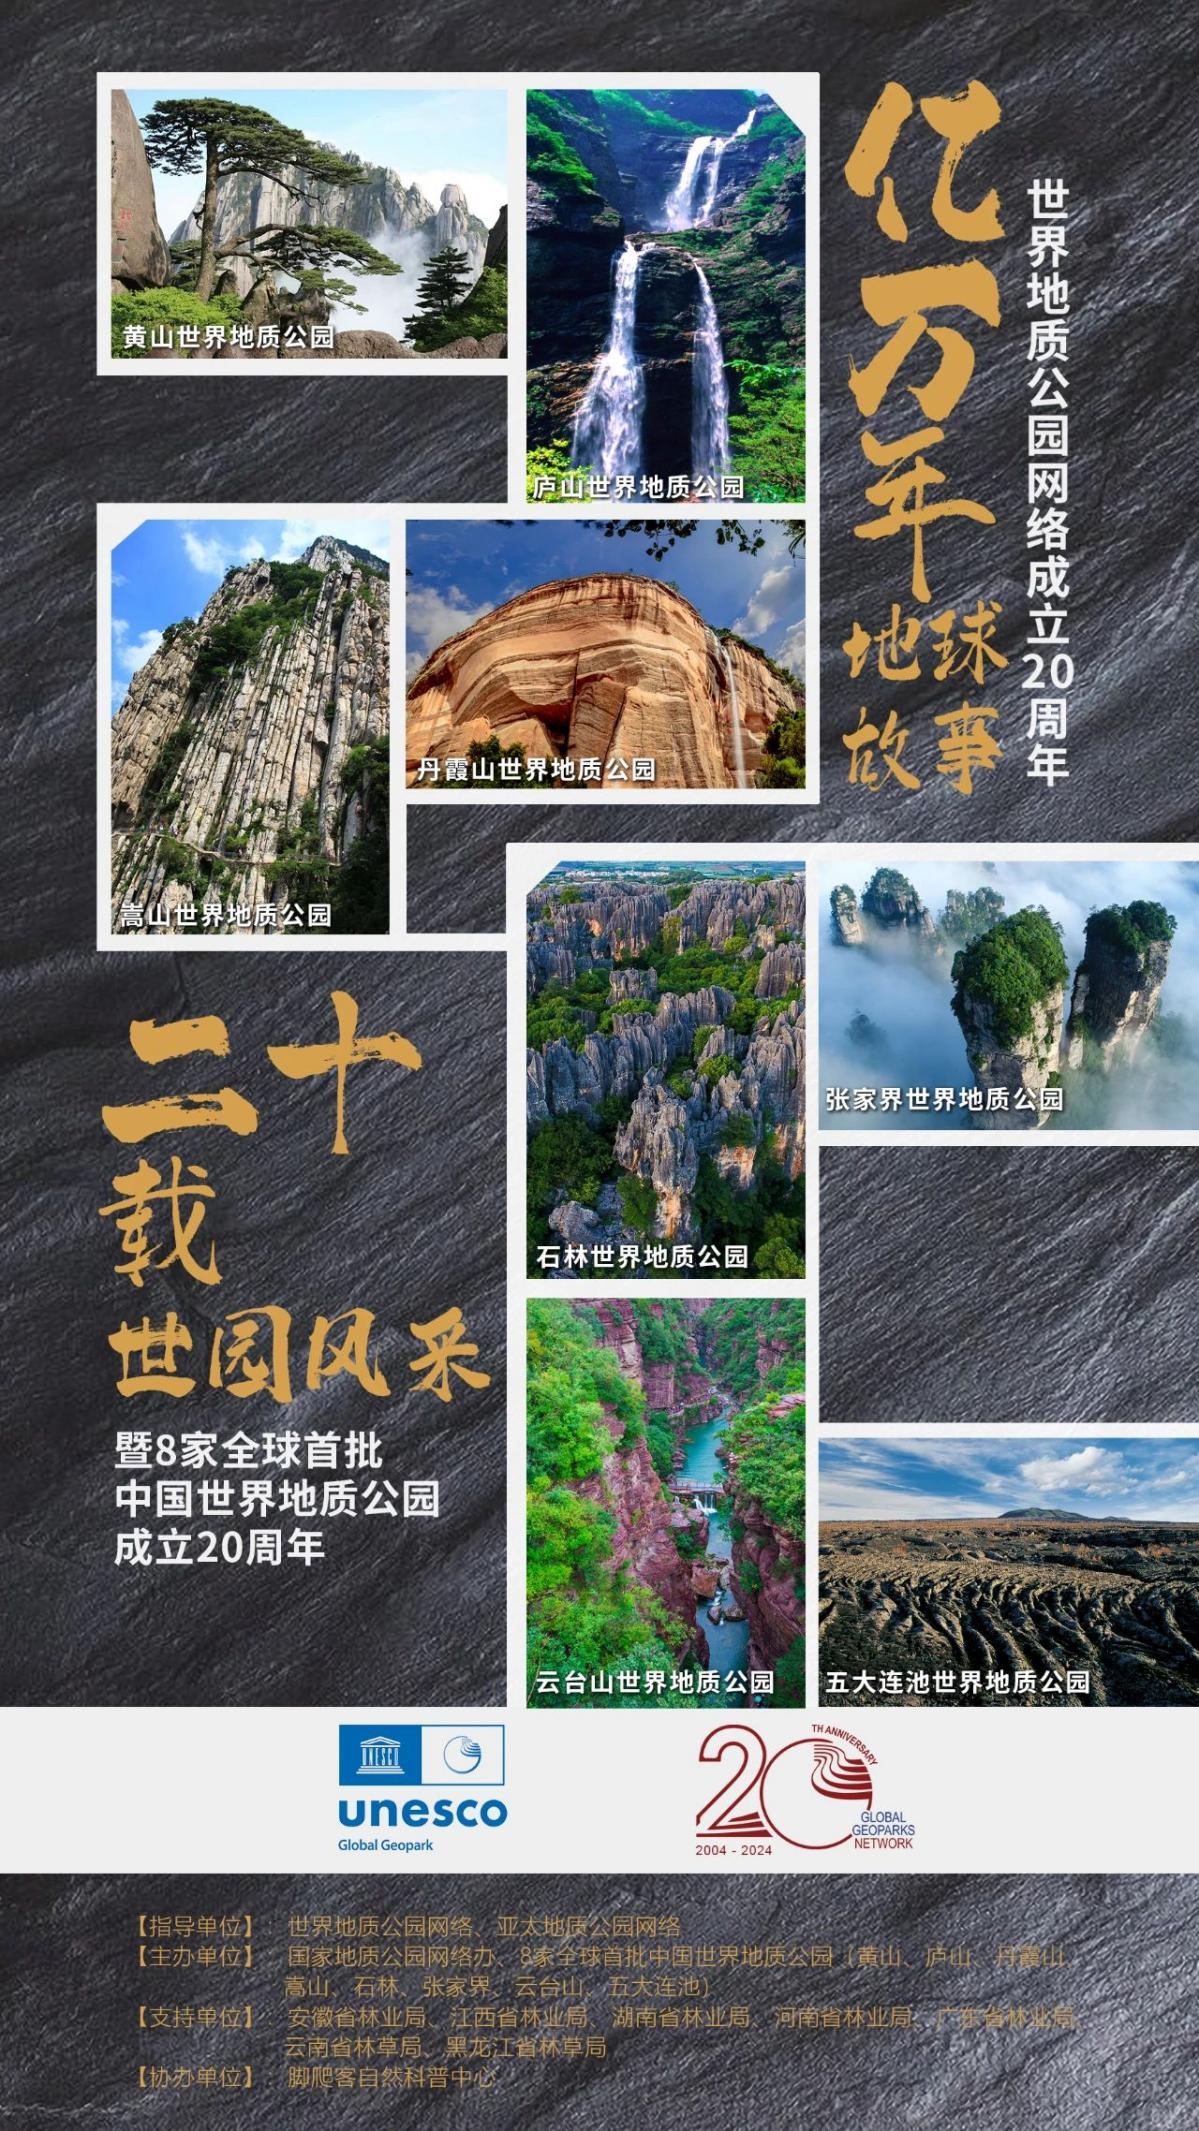 Celebrating Billions of Years of Earth's Story and Two Decades of Horticultural Elegance | The Global Geoparks Network and the 20th Anniversary Campaign for the First Eight Global Geoparks in China Kick Off!